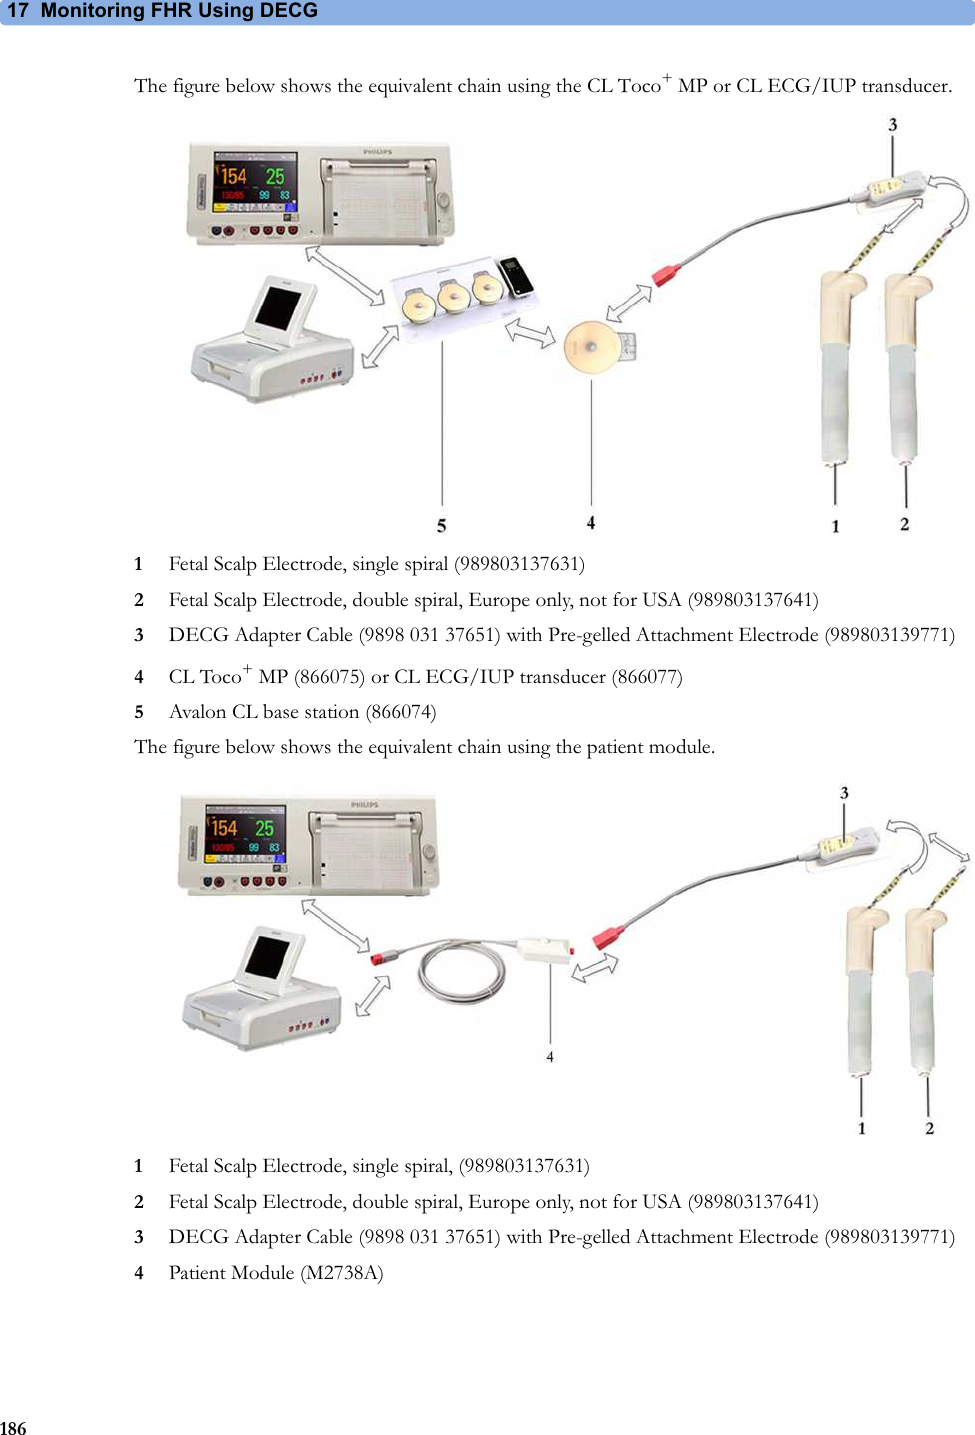 17  Monitoring FHR Using DECG186The figure below shows the equivalent chain using the CL Toco+ MP or CL ECG/IUP transducer.1Fetal Scalp Electrode, single spiral (989803137631)2Fetal Scalp Electrode, double spiral, Europe only, not for USA (989803137641)3DECG Adapter Cable (9898 031 37651) with Pre-gelled Attachment Electrode (989803139771)4CL Toco+ MP (866075) or CL ECG/IUP transducer (866077)5Avalon CL base station (866074)The figure below shows the equivalent chain using the patient module.1Fetal Scalp Electrode, single spiral, (989803137631)2Fetal Scalp Electrode, double spiral, Europe only, not for USA (989803137641)3DECG Adapter Cable (9898 031 37651) with Pre-gelled Attachment Electrode (989803139771)4Patient Module (M2738A)